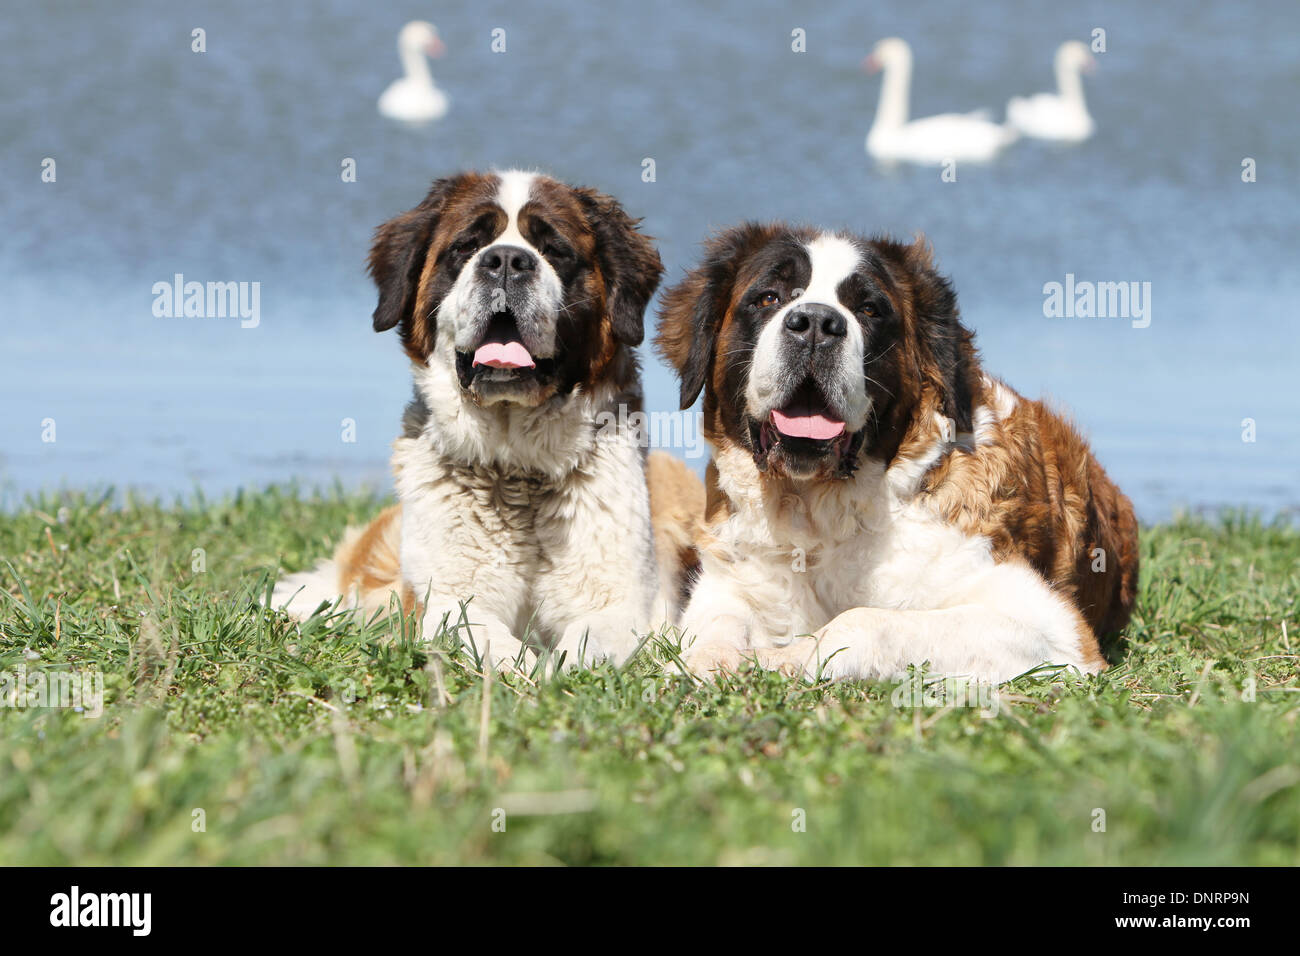 Dog Saint Bernard Longhaired Two Adults Lying Front Of A Lake Stock Photo Alamy